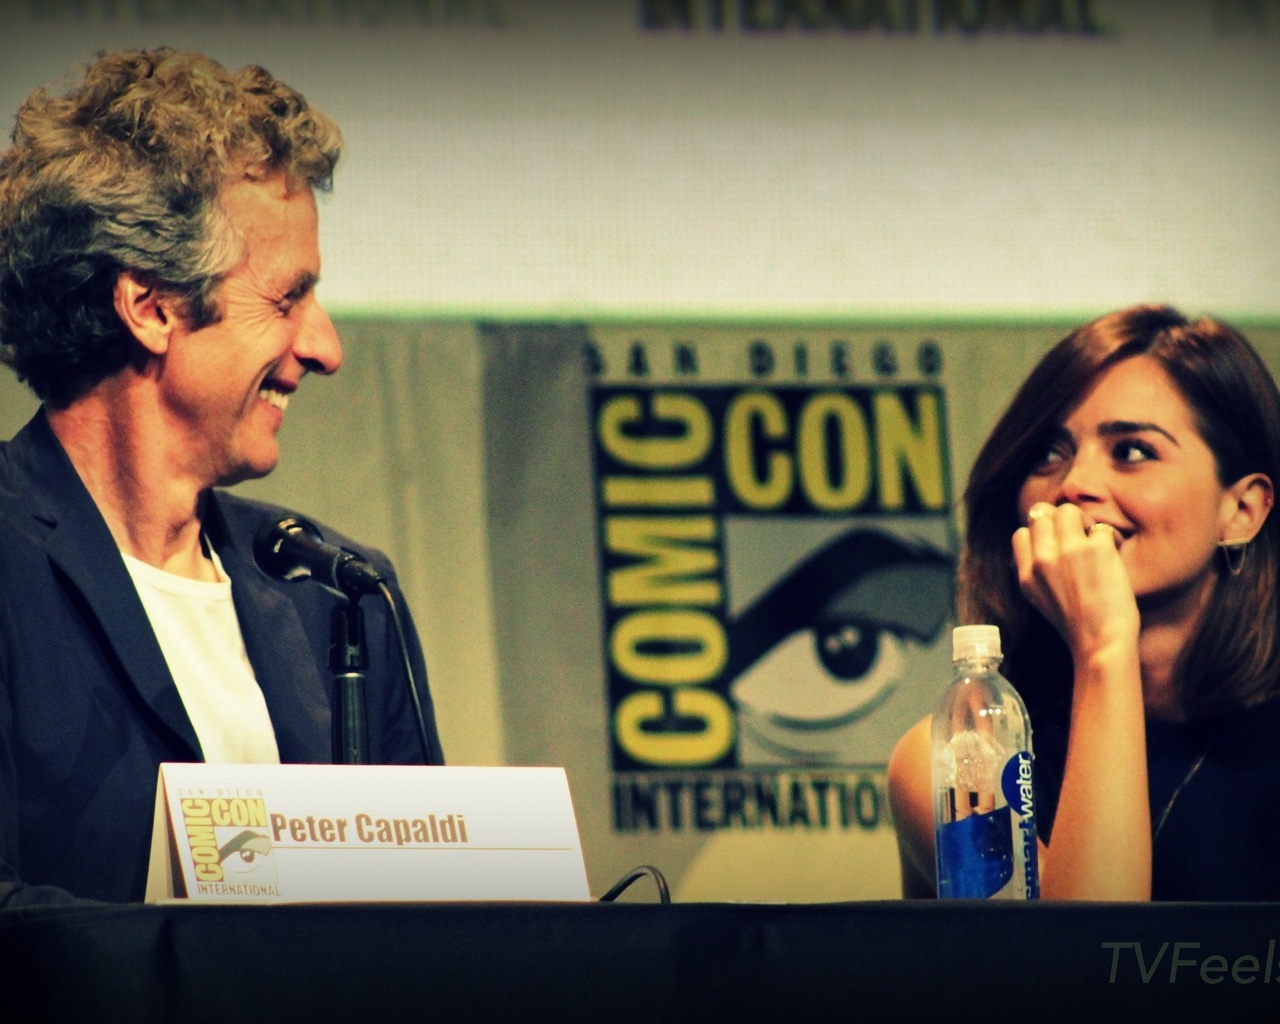 Doctor Who Peter Capaldi and Jenna Coleman at Comic Con for 1280 x 1024 resolution